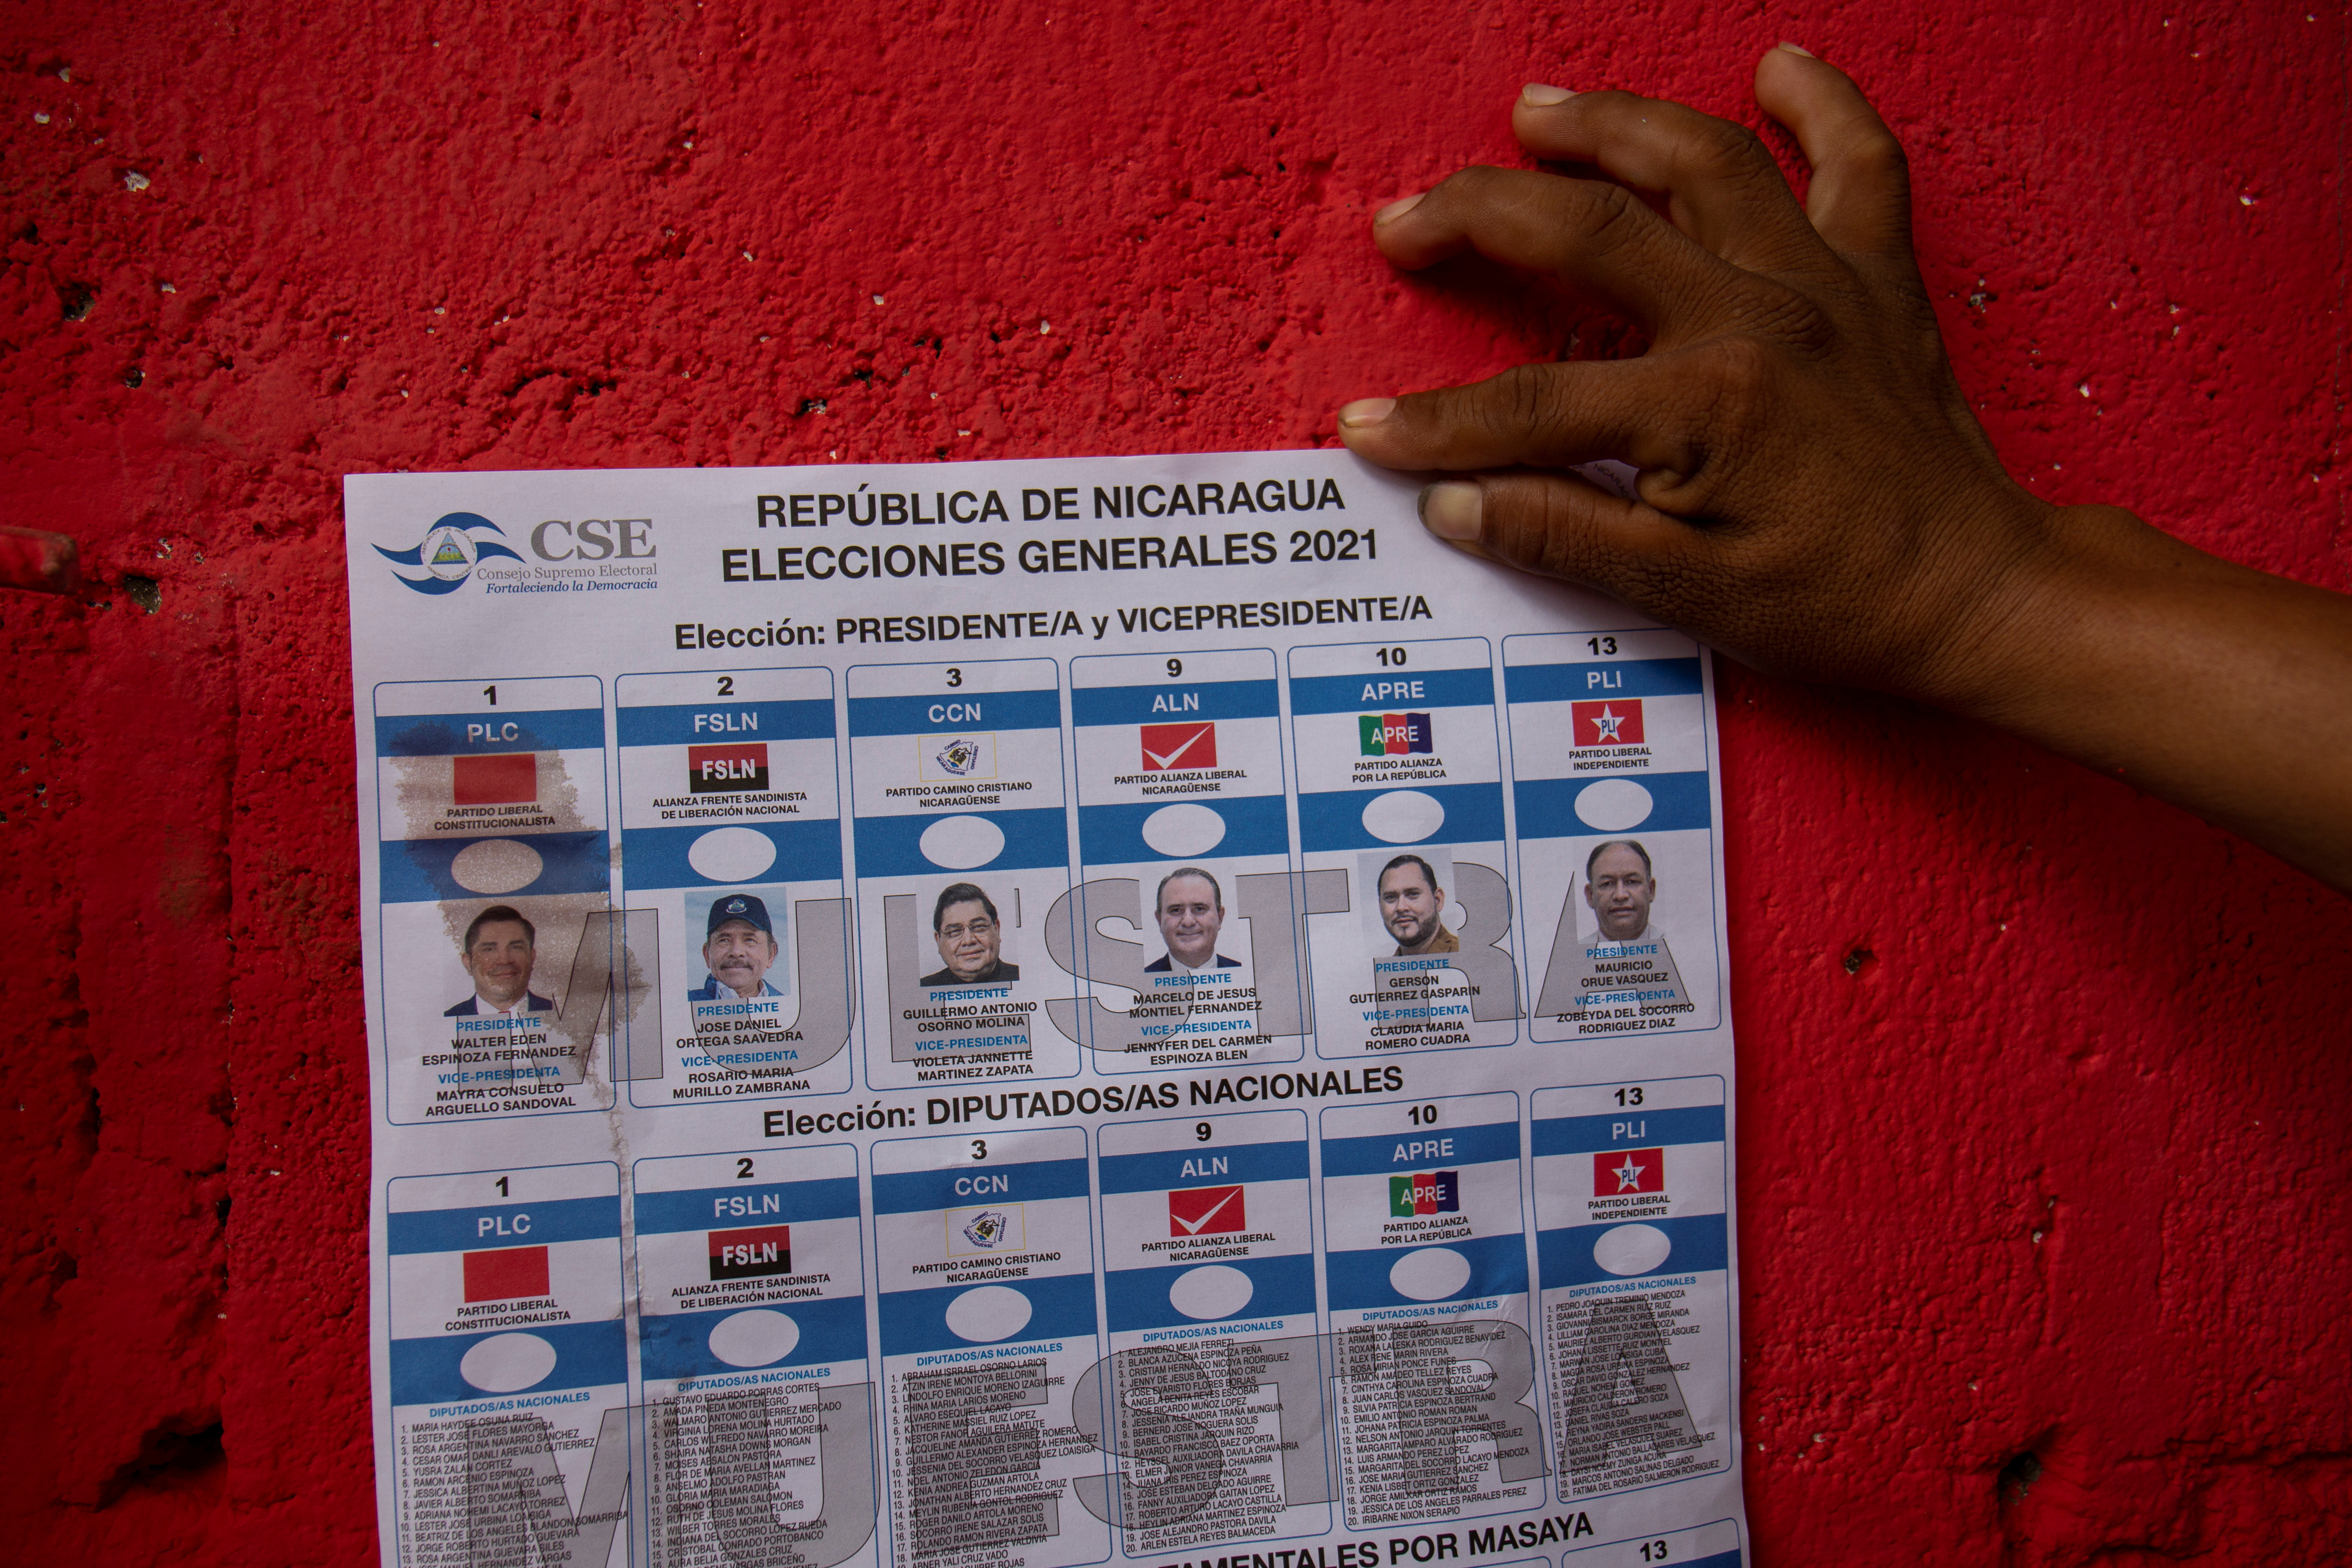 A supporter of Marcelo Montiel, presidential candidate of the Nicaraguan Liberal Alliance (ALN), shows a ballot with the presidential candidates during a campaign rally ahead of the November 7 presidential election, in Masaya, Nicaragua October 31, 2021. REUTERS/Maynor Valenzuela NO RESALES. NO ARCHIVES